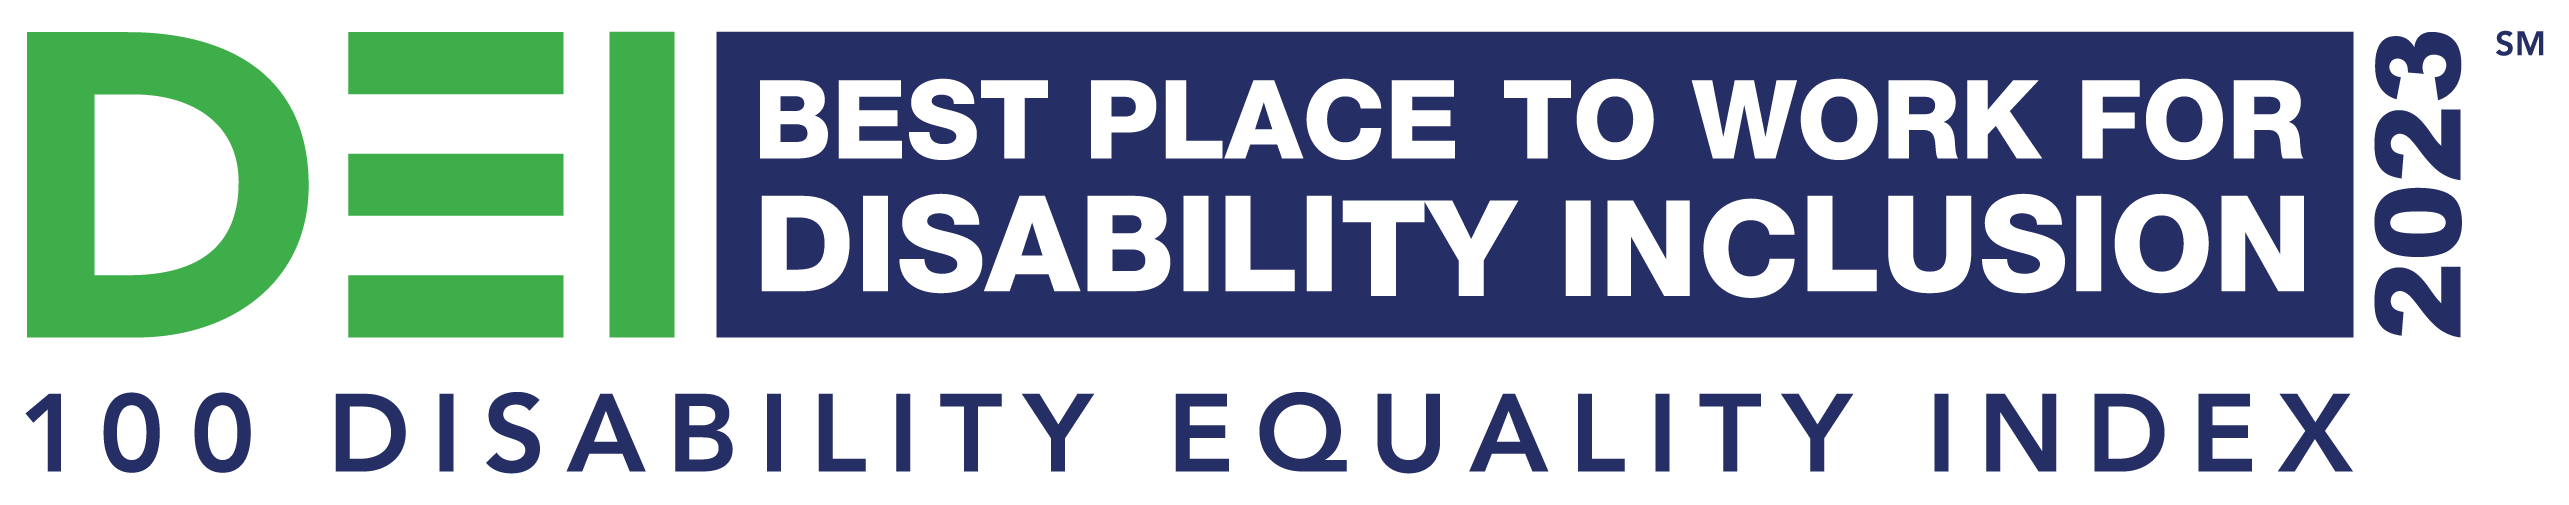 DEI Best Place to Work for Disability Inclusion. 100 Disability Equality Index in 2023.